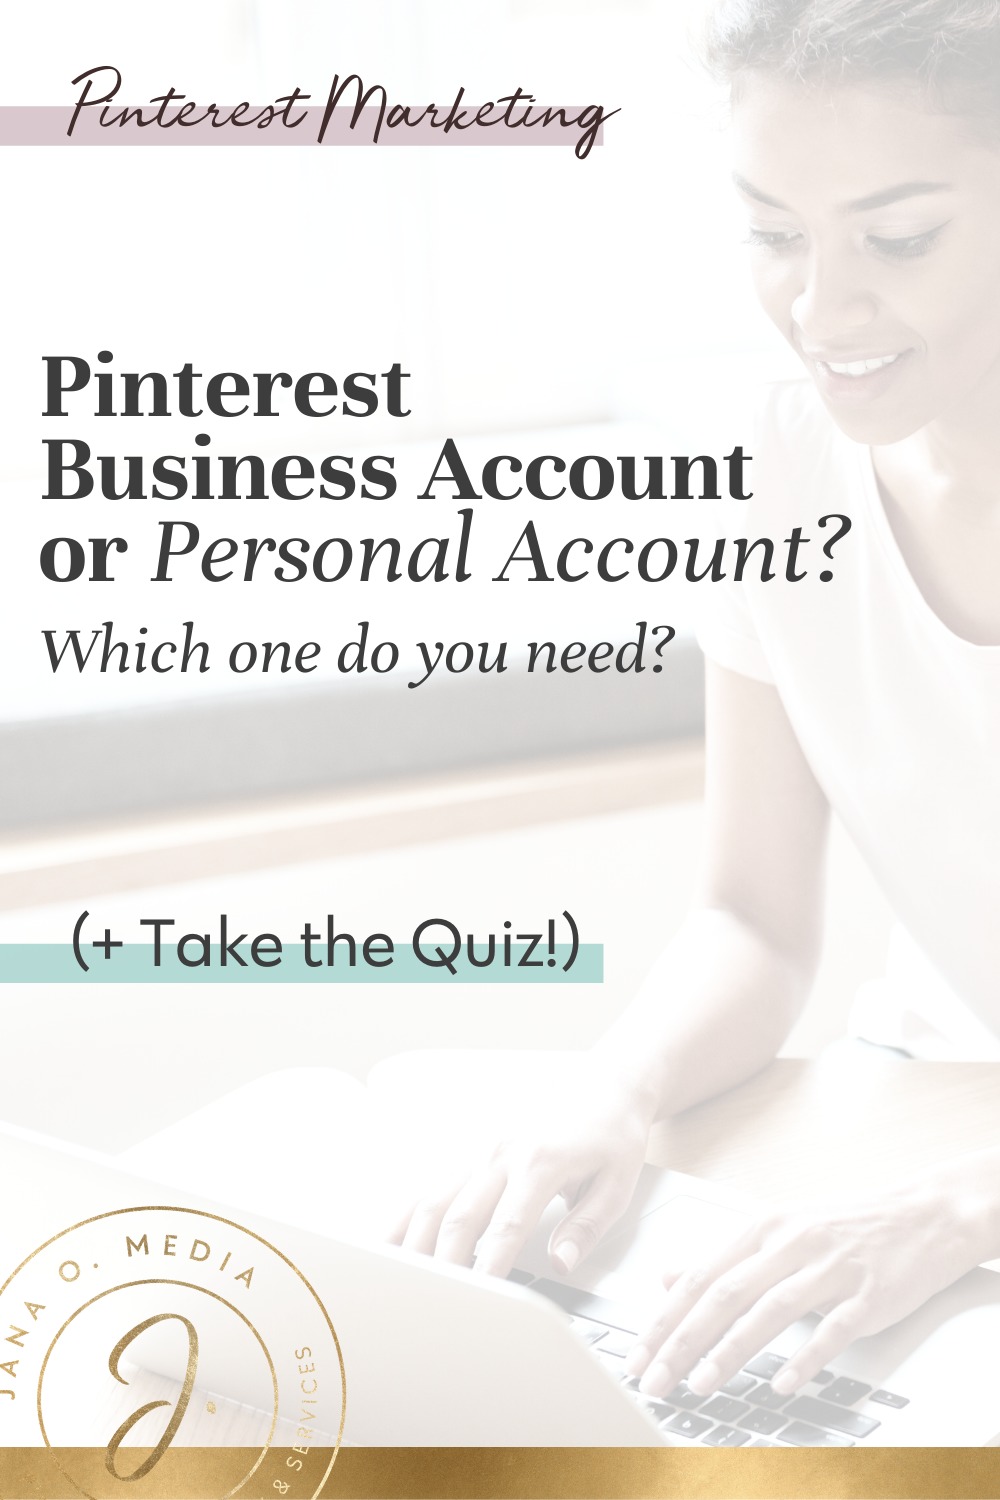 Pinterest for Coaches - Convert your personal account to a Pinterest for business account - or start a new one?